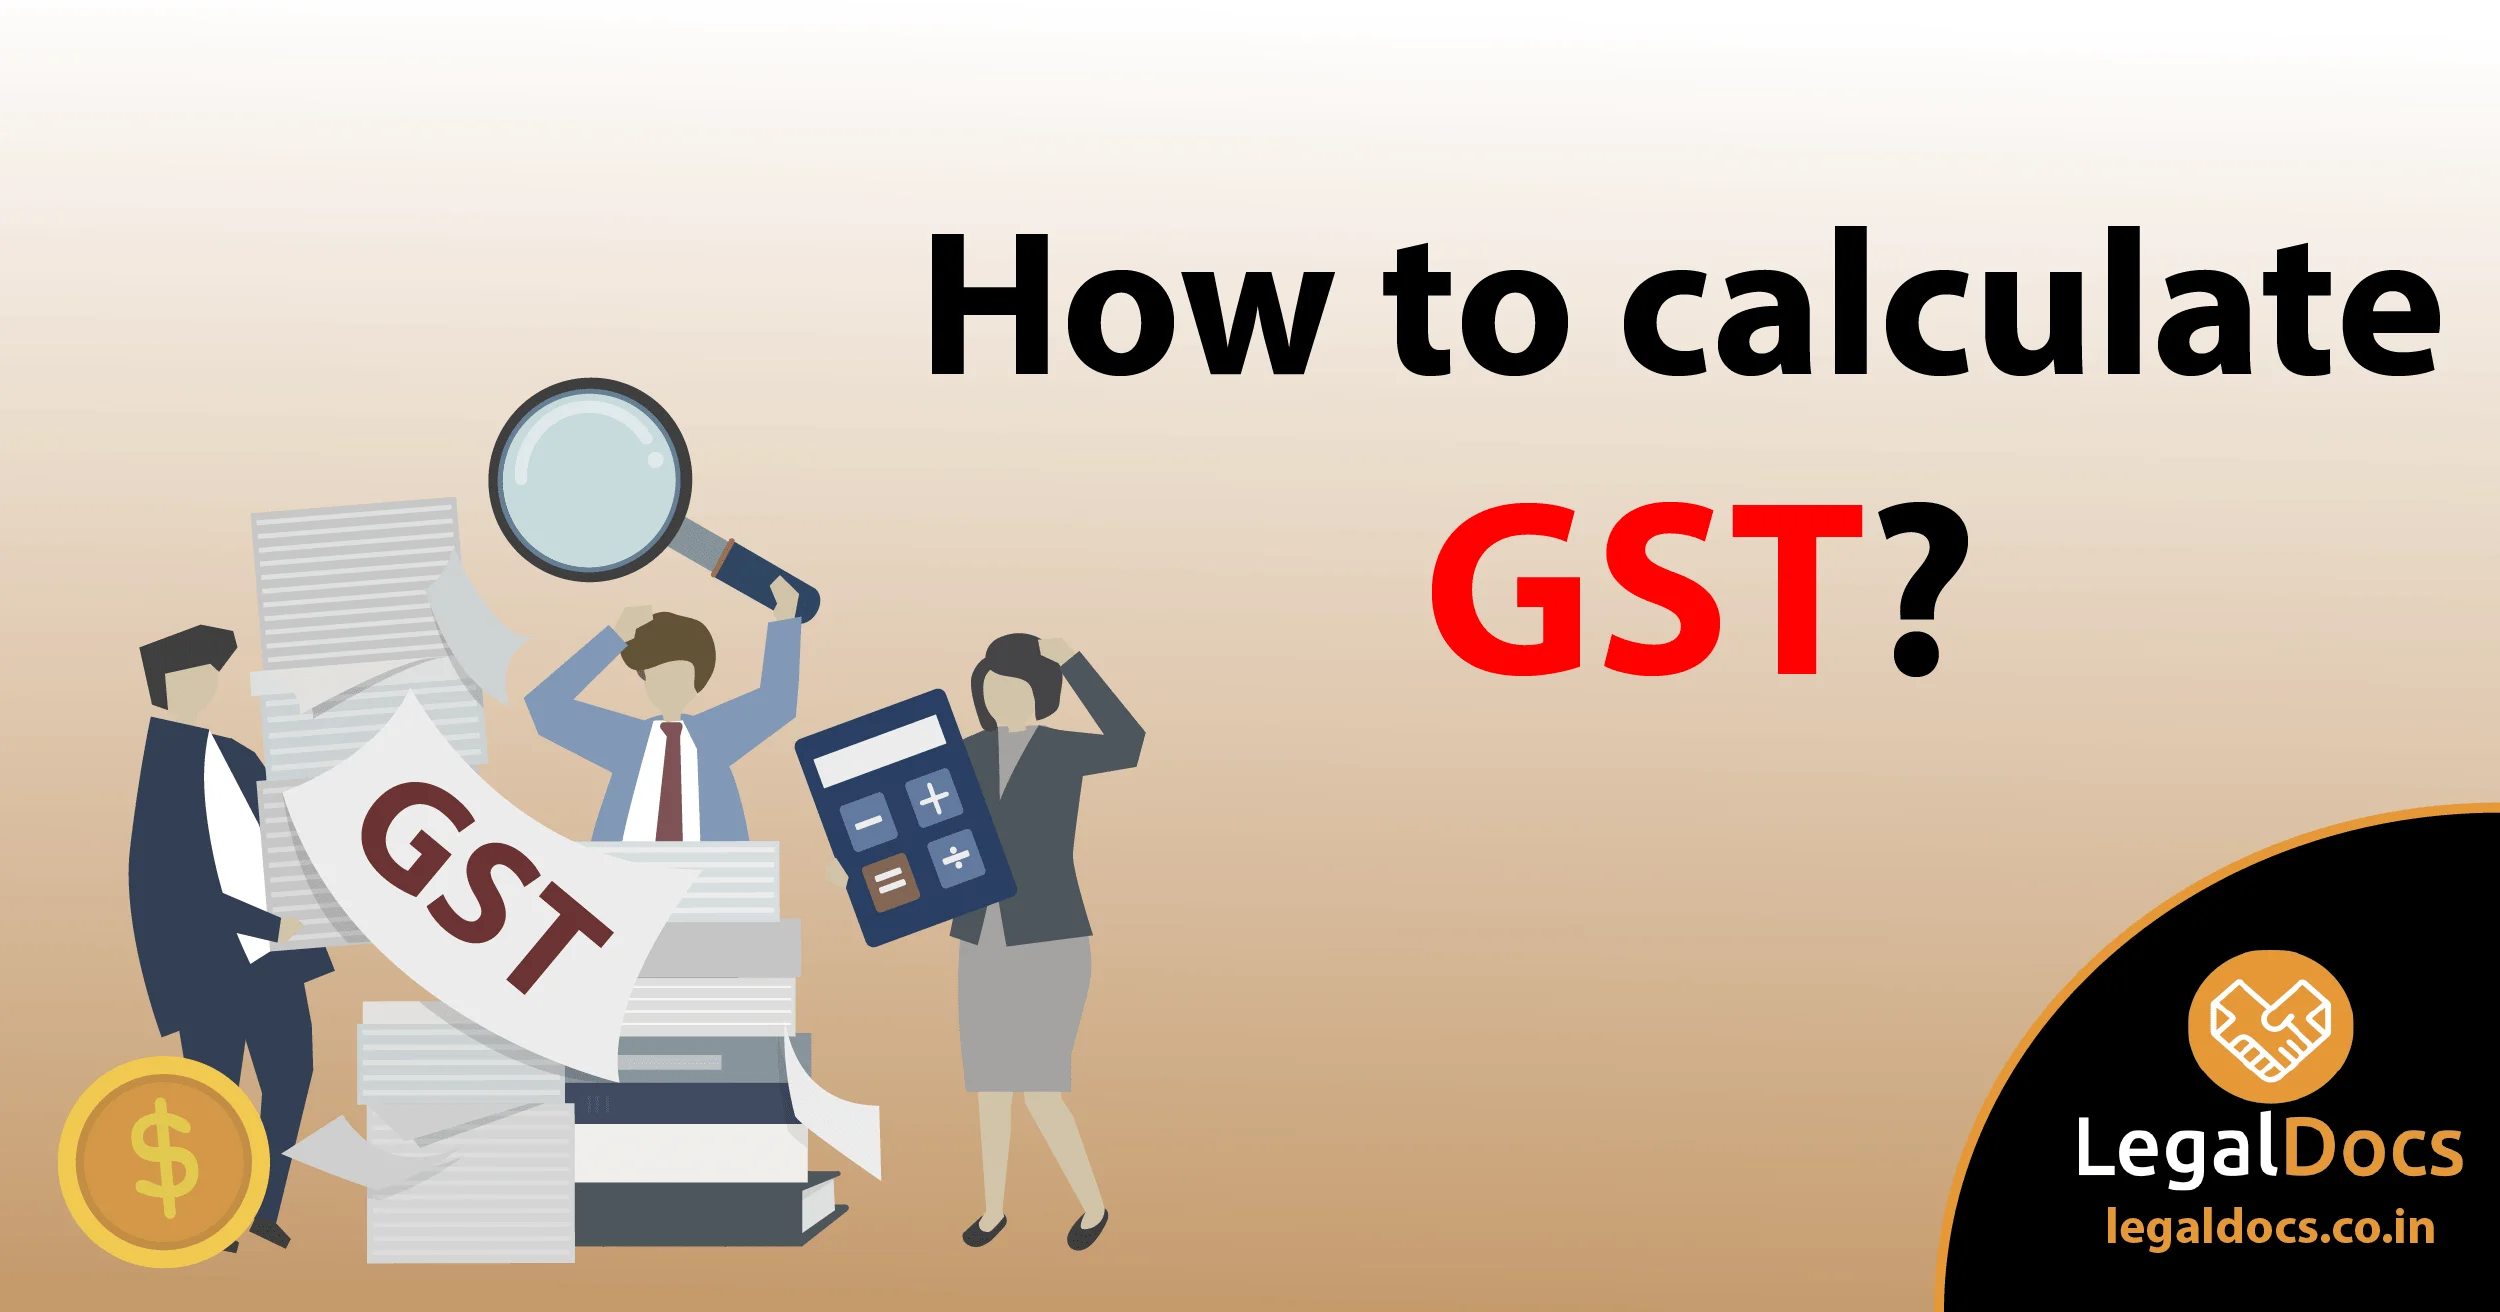 How to Calculate GST Online? - LegalDocs